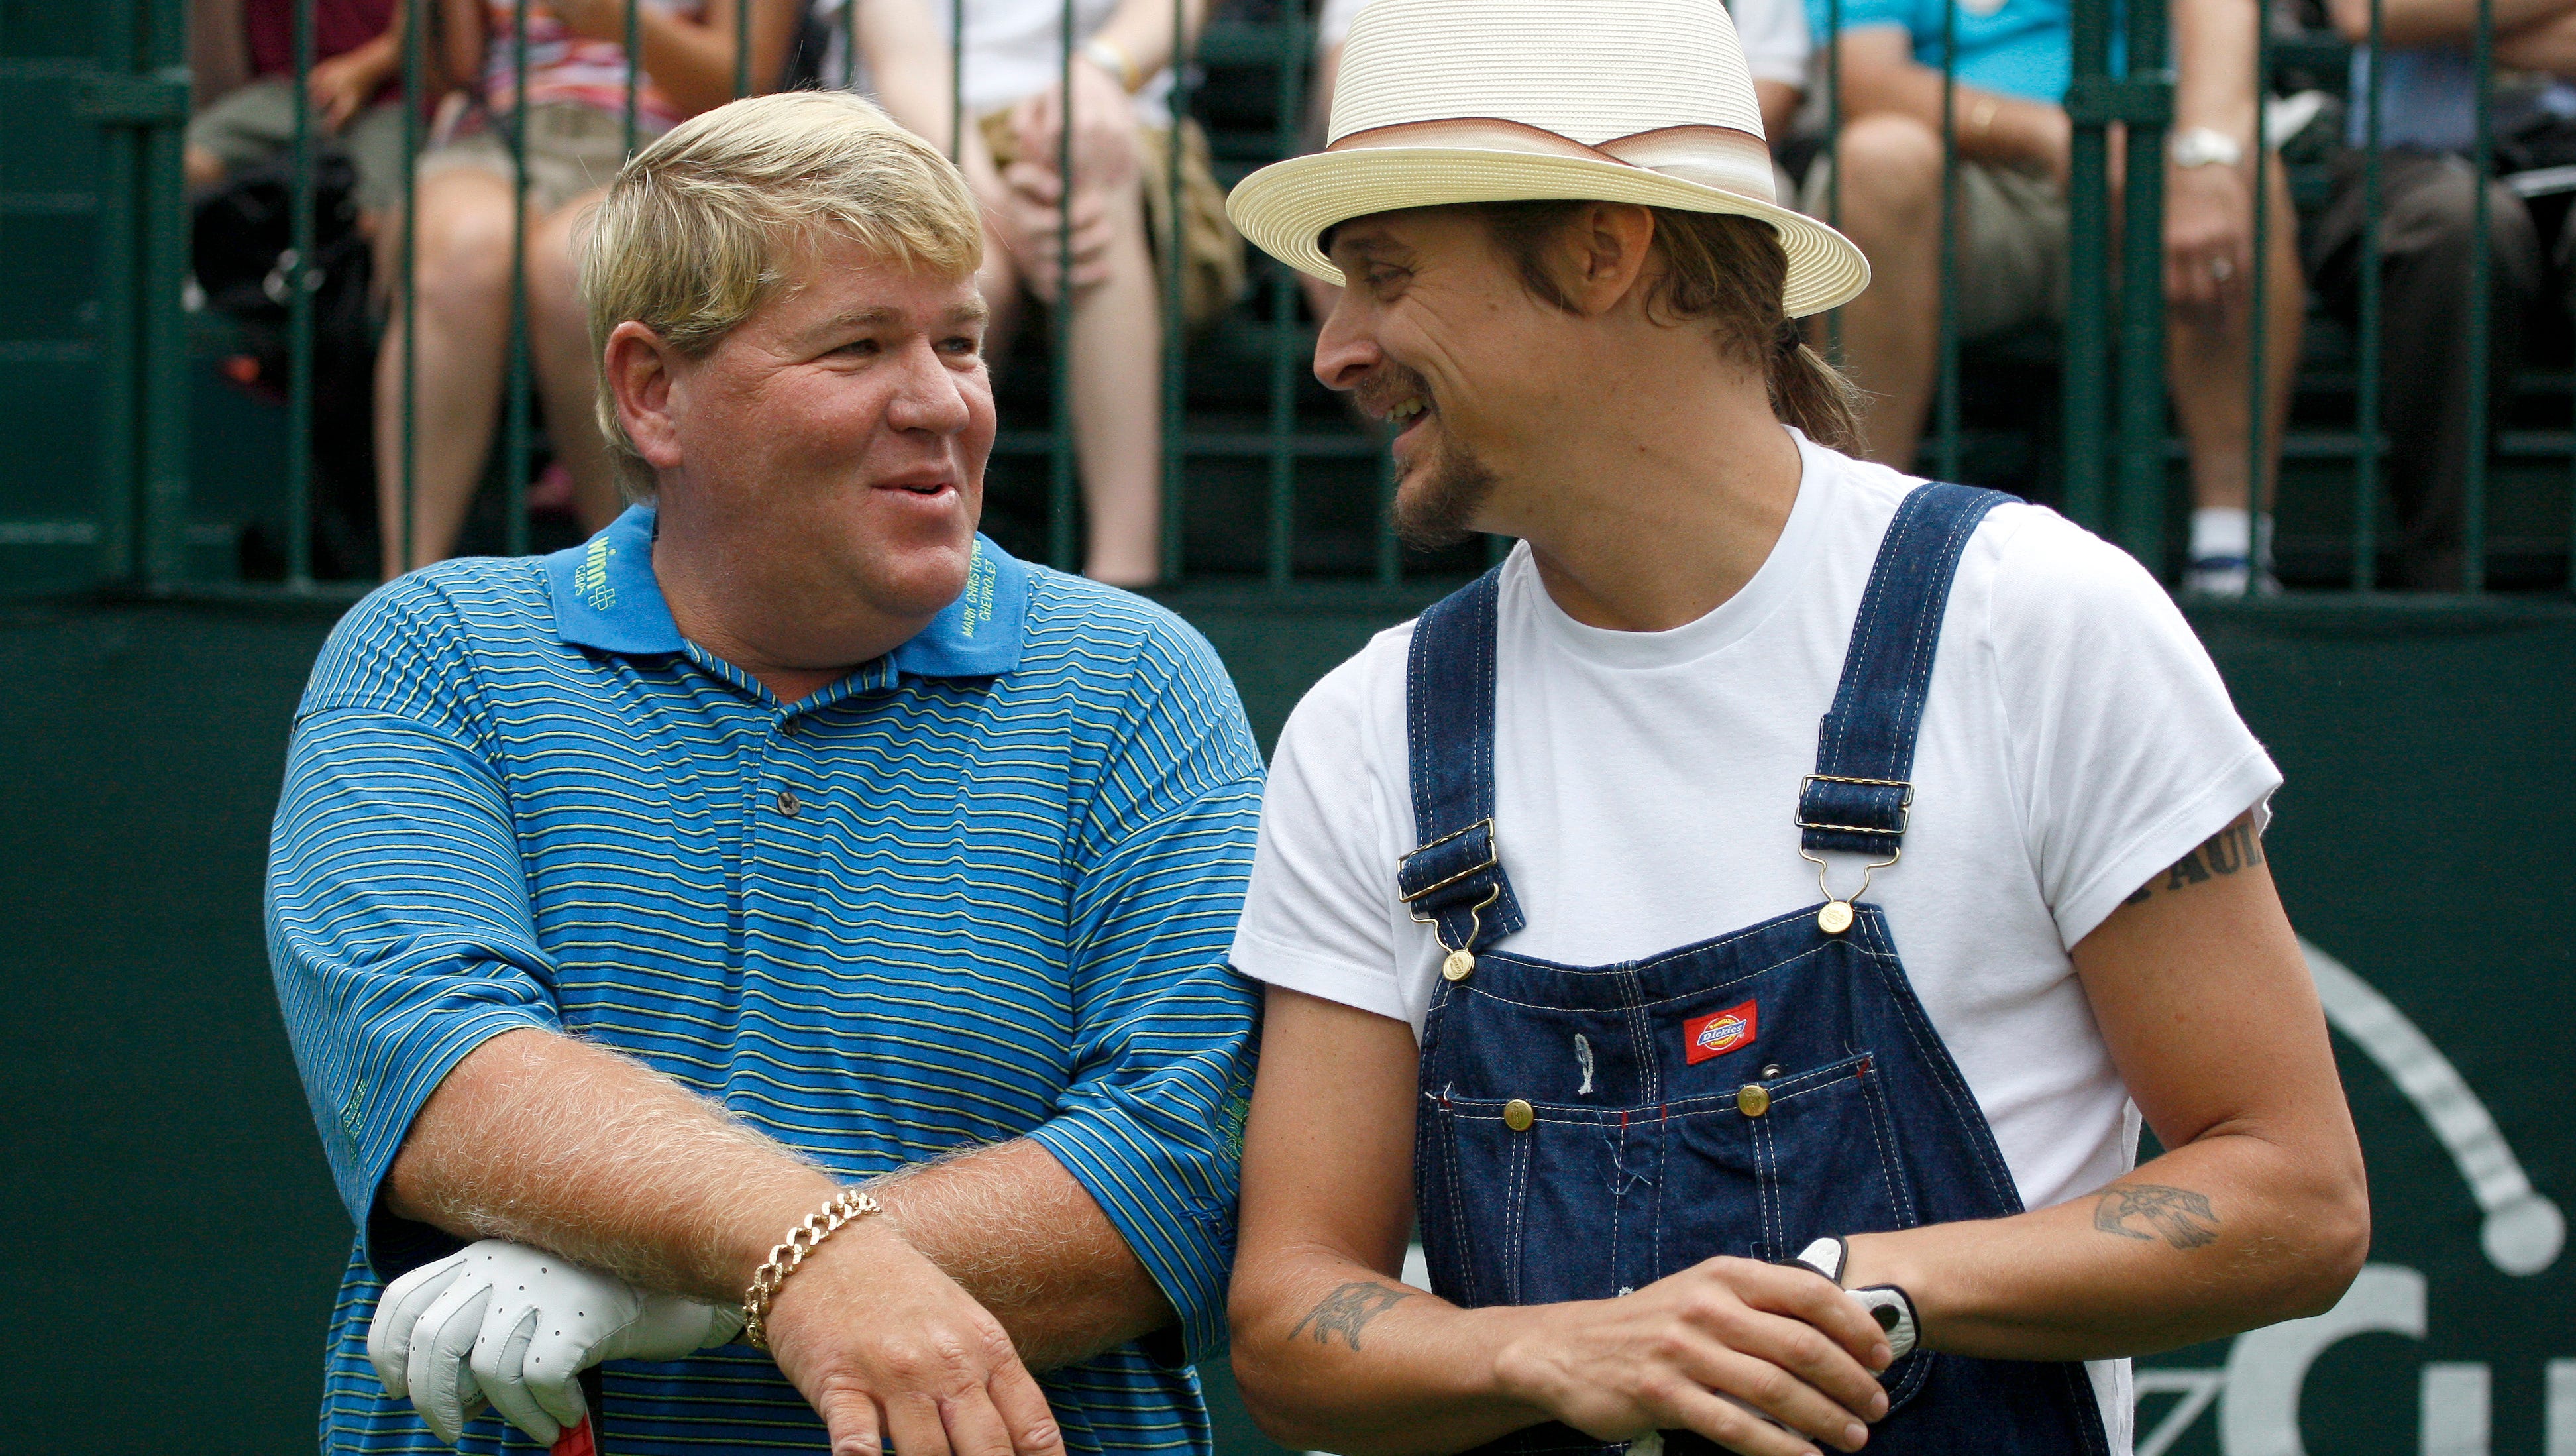 Golfer John Daly, left, and Kid Rock chat before teeing off at the 2008 Buick Open pro-am.